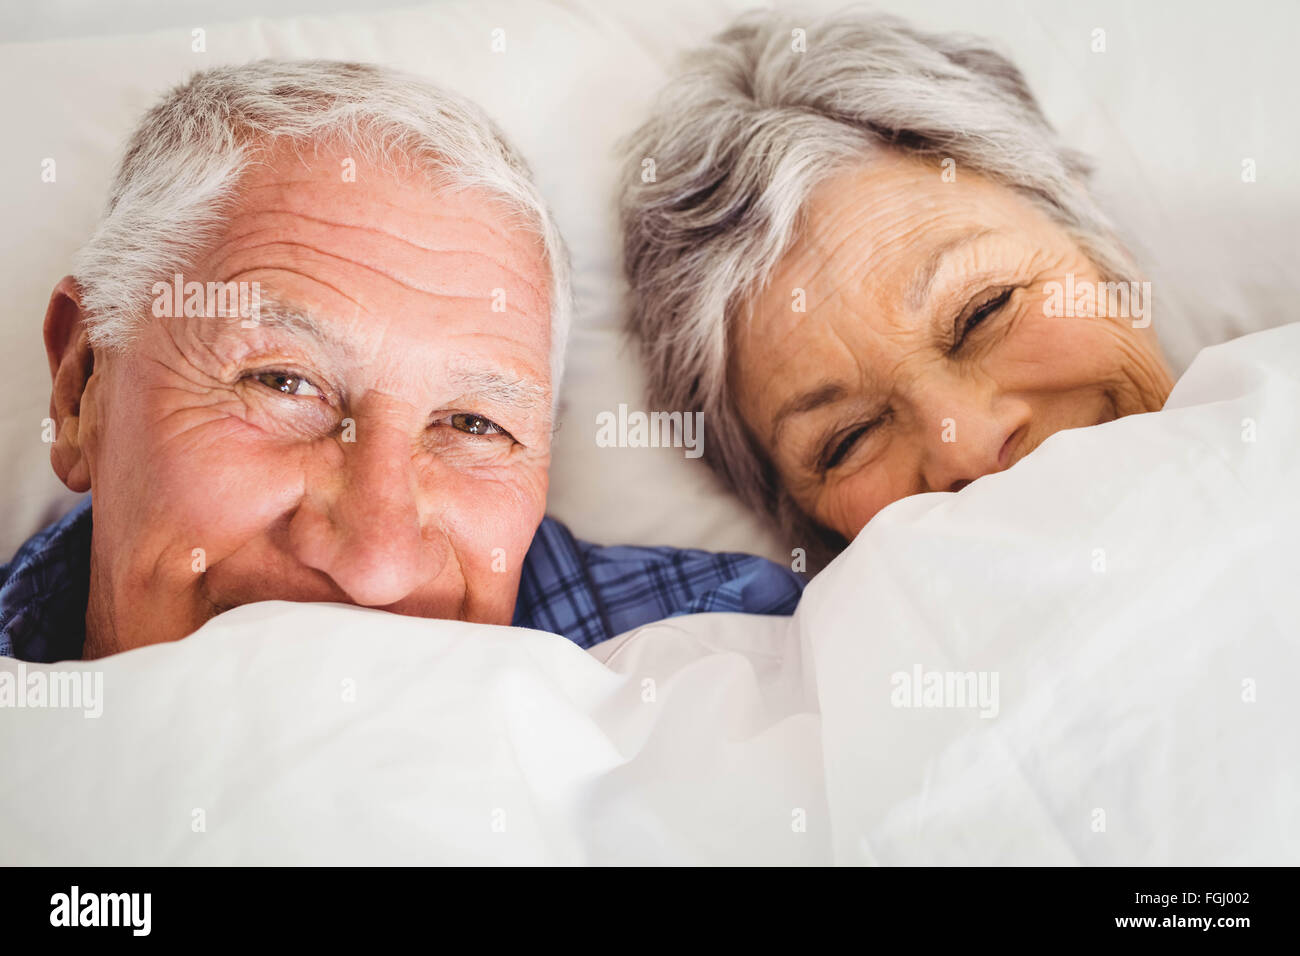 Happy senior couple smiling in bed Banque D'Images